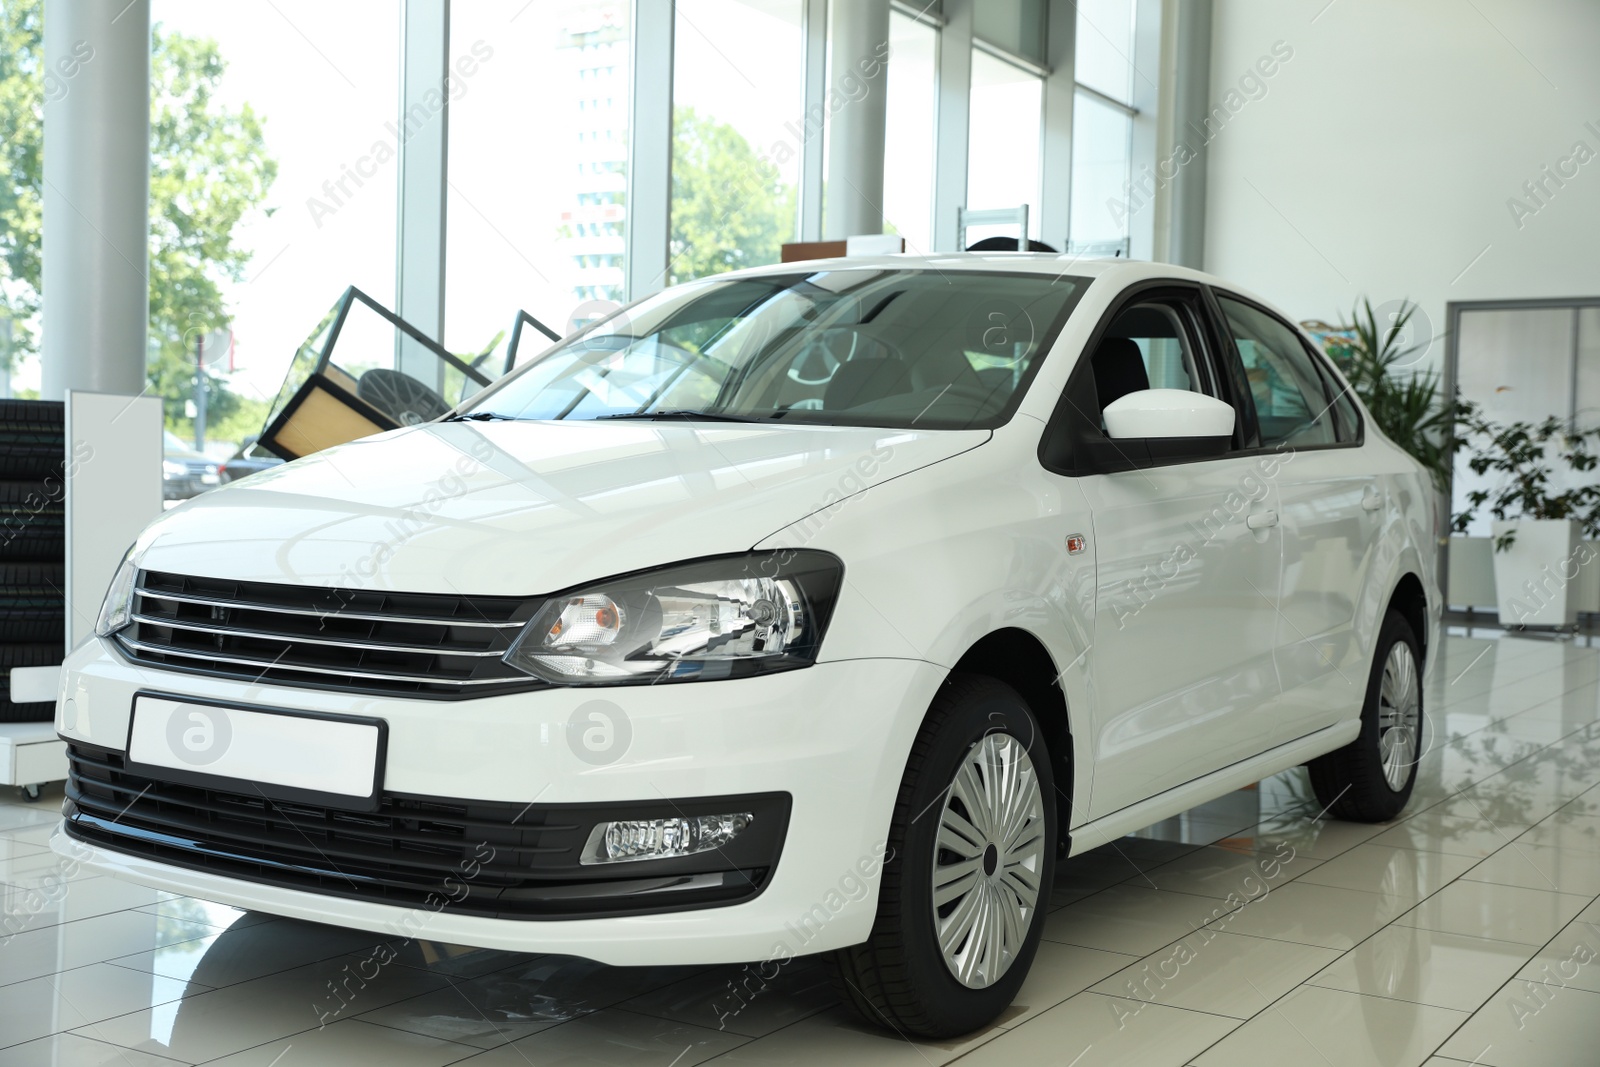 Photo of New luxury white car in modern auto dealership